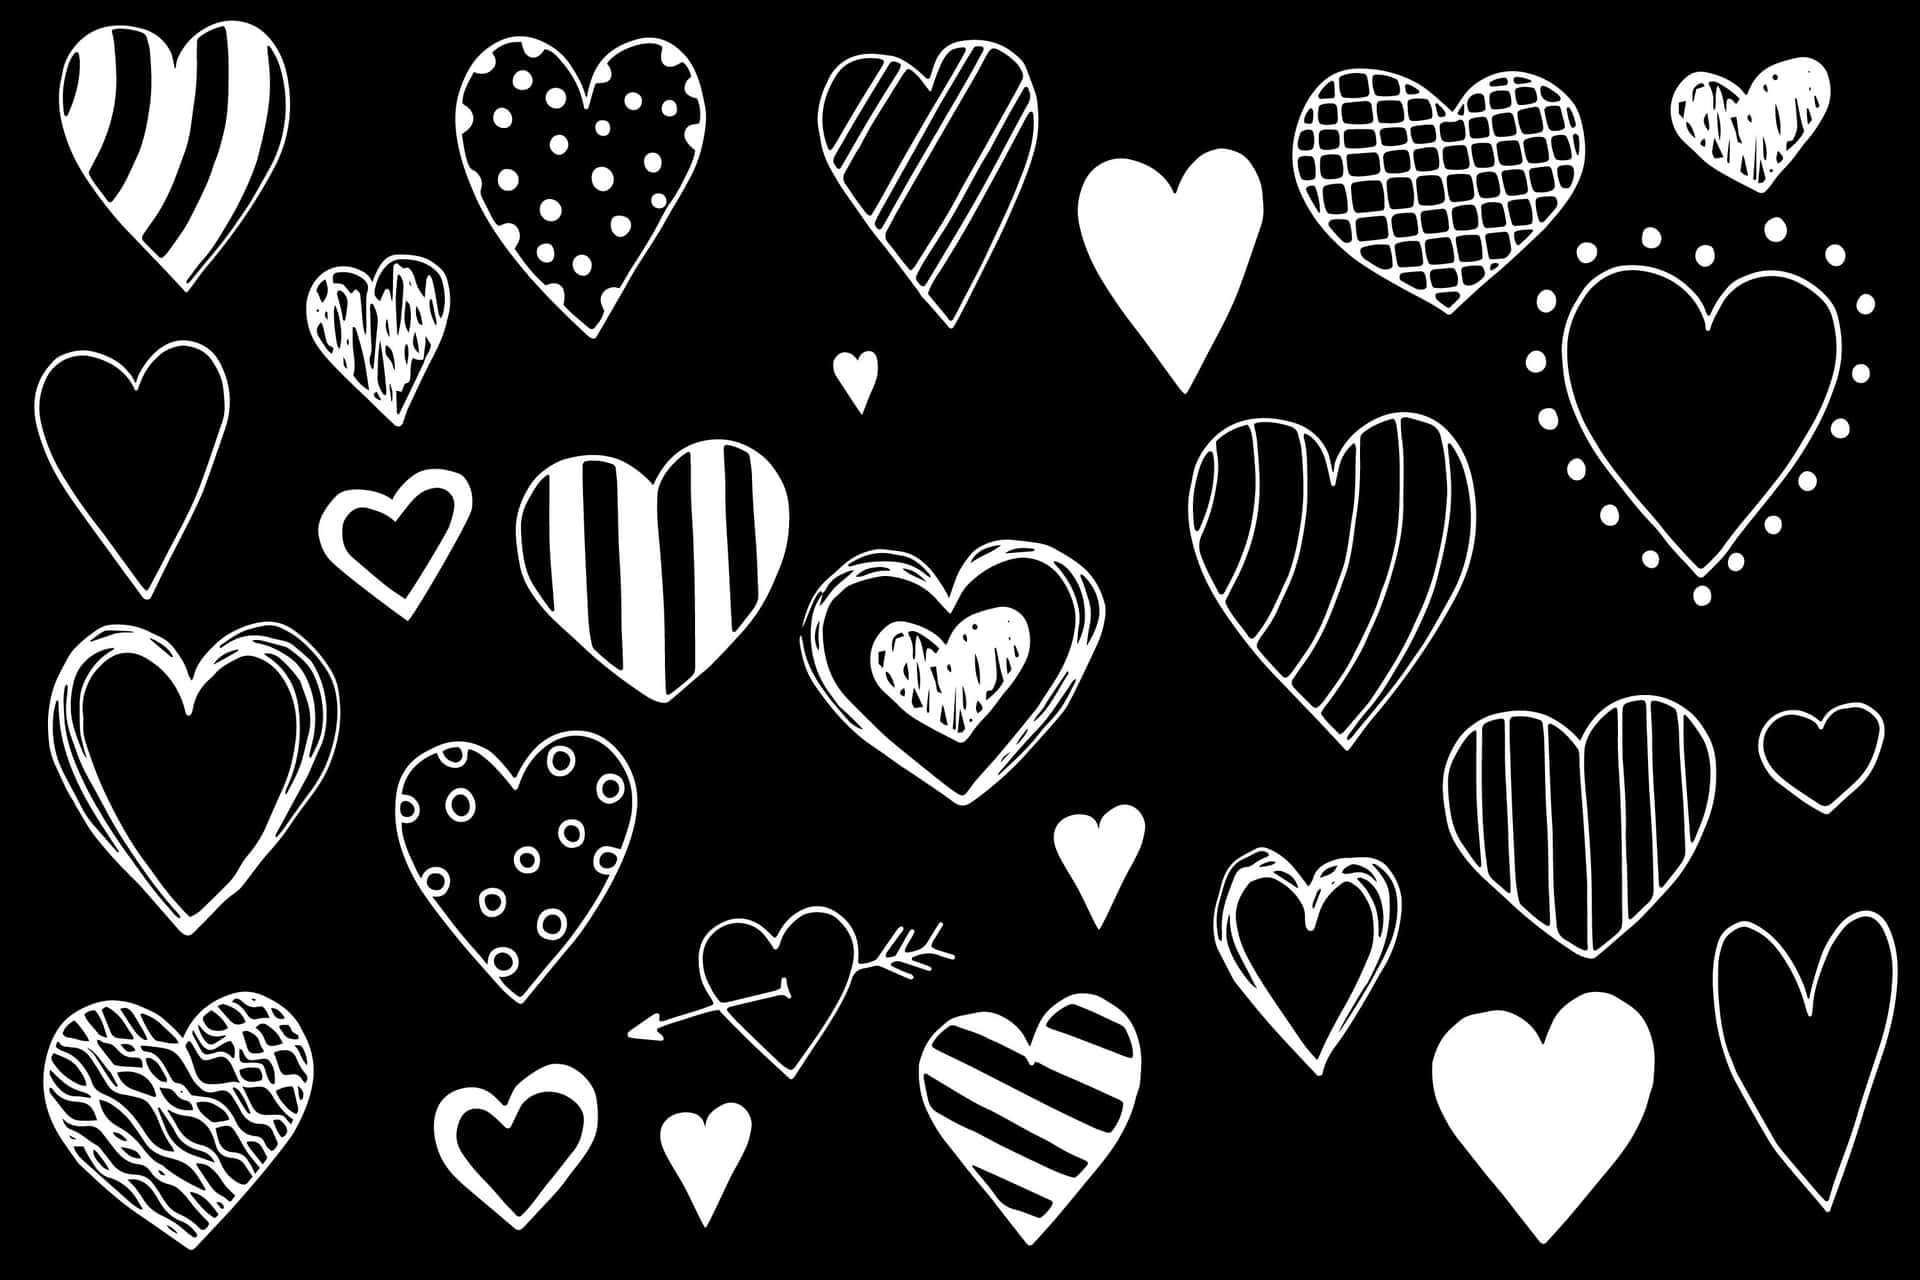 Artistic Hand-Drawn Heart Doodle on a Plain Background Wallpaper